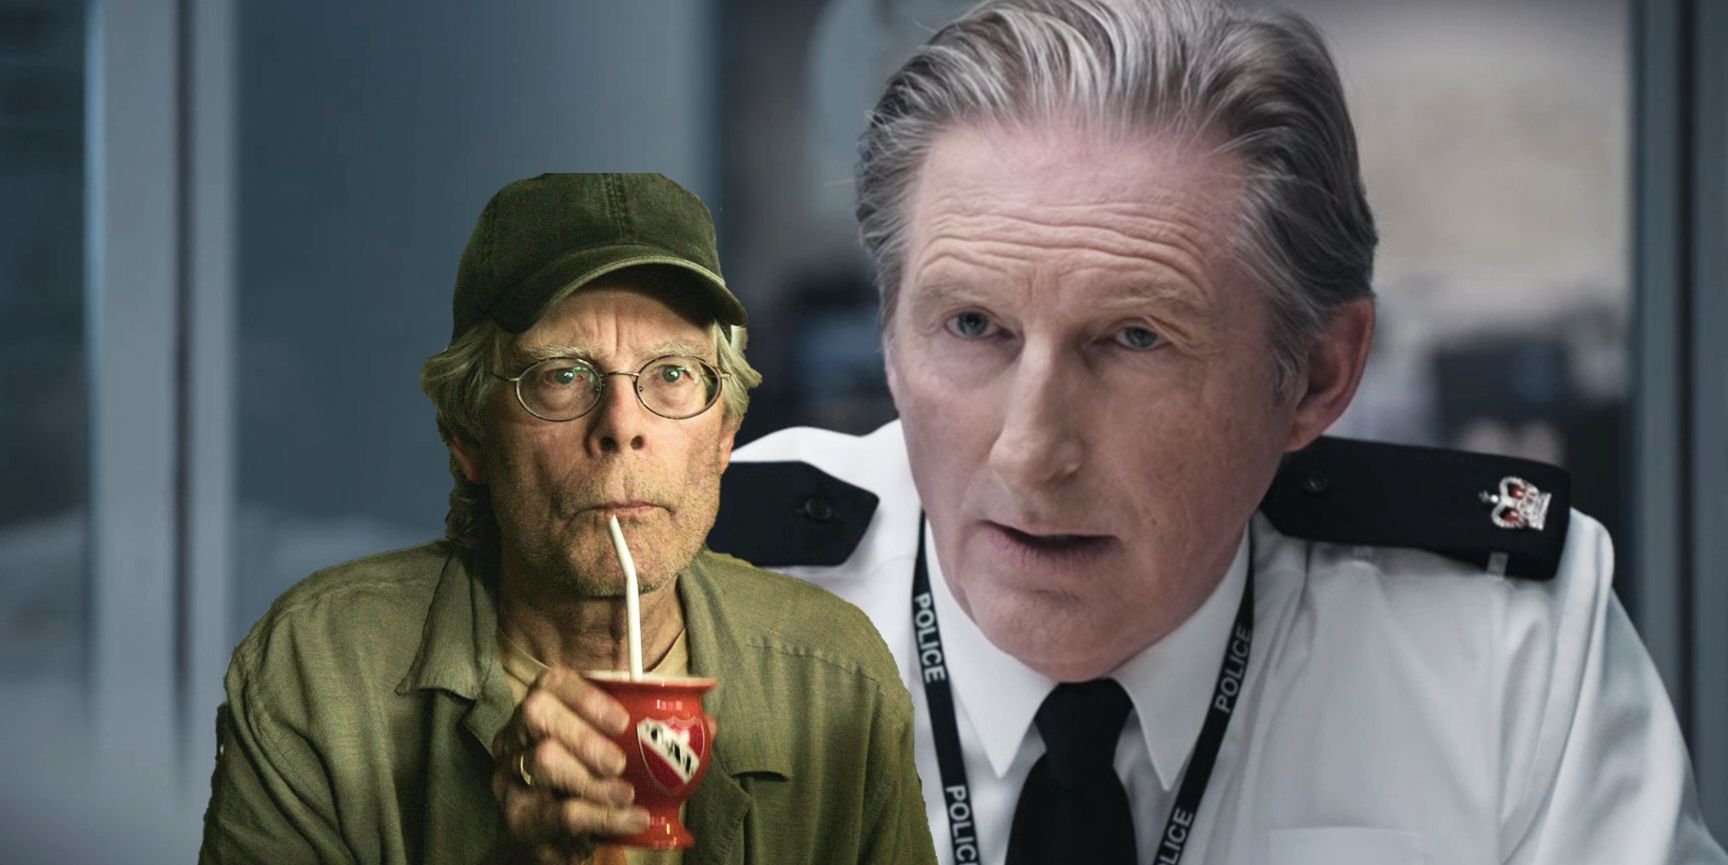 Stephen King watches Line of Duty